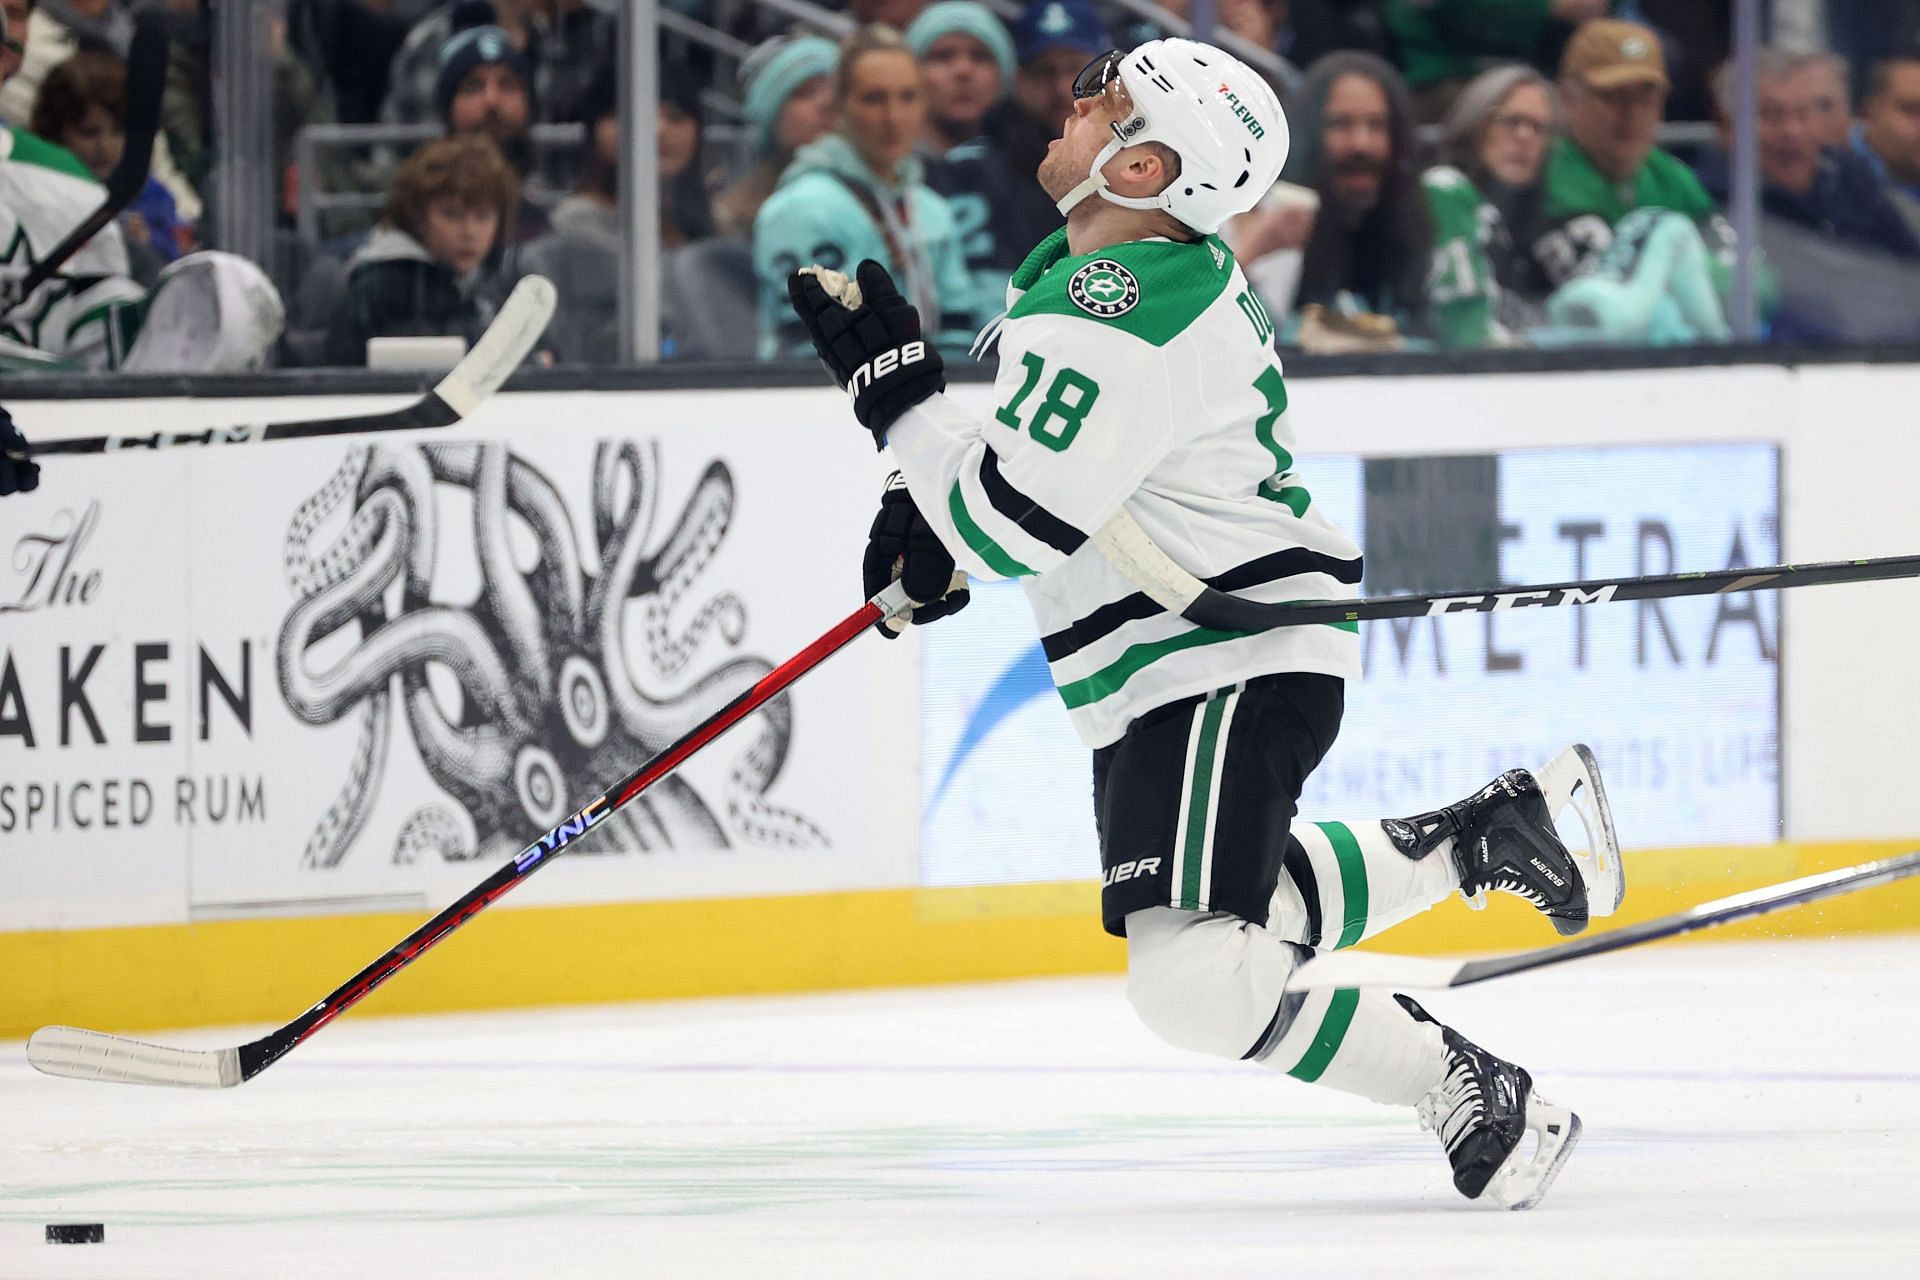 Max Domi played both the Stars and Coyotes